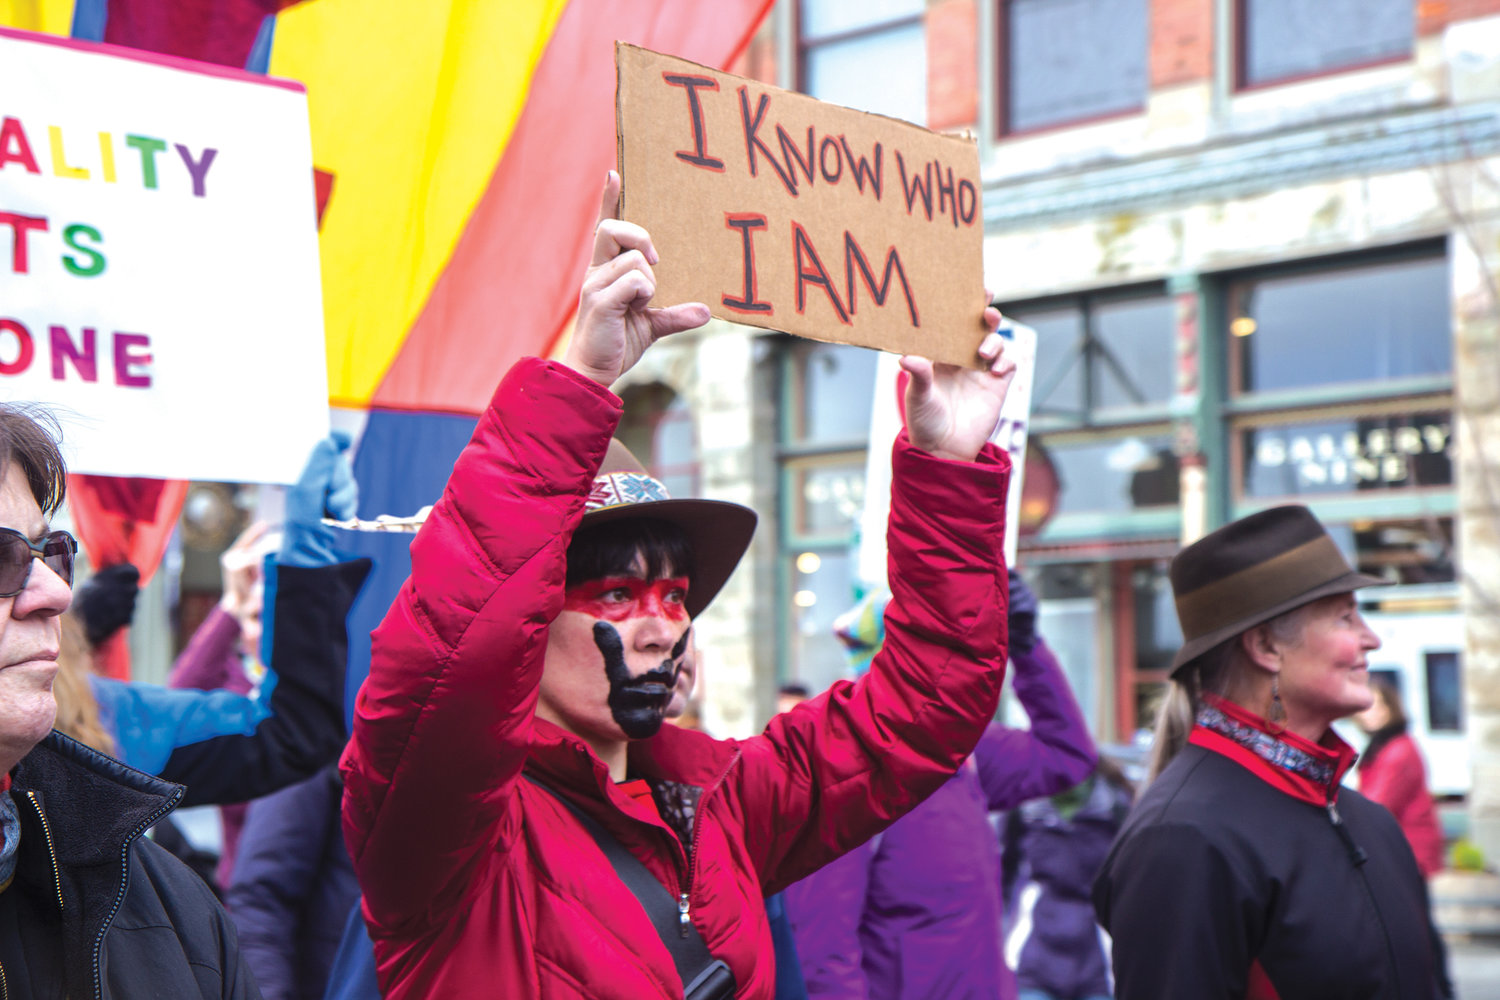 Angela Wisniewski marches down Water Street on Jan. 20 with hundreds of activists during the third annual Olympic Peninsula Women’s March. This year the march was called the Womxn’s Wave. More than 1,000 marchers rallied for human rights and in remembrance of Washington’s missing and murdered indigenous women.